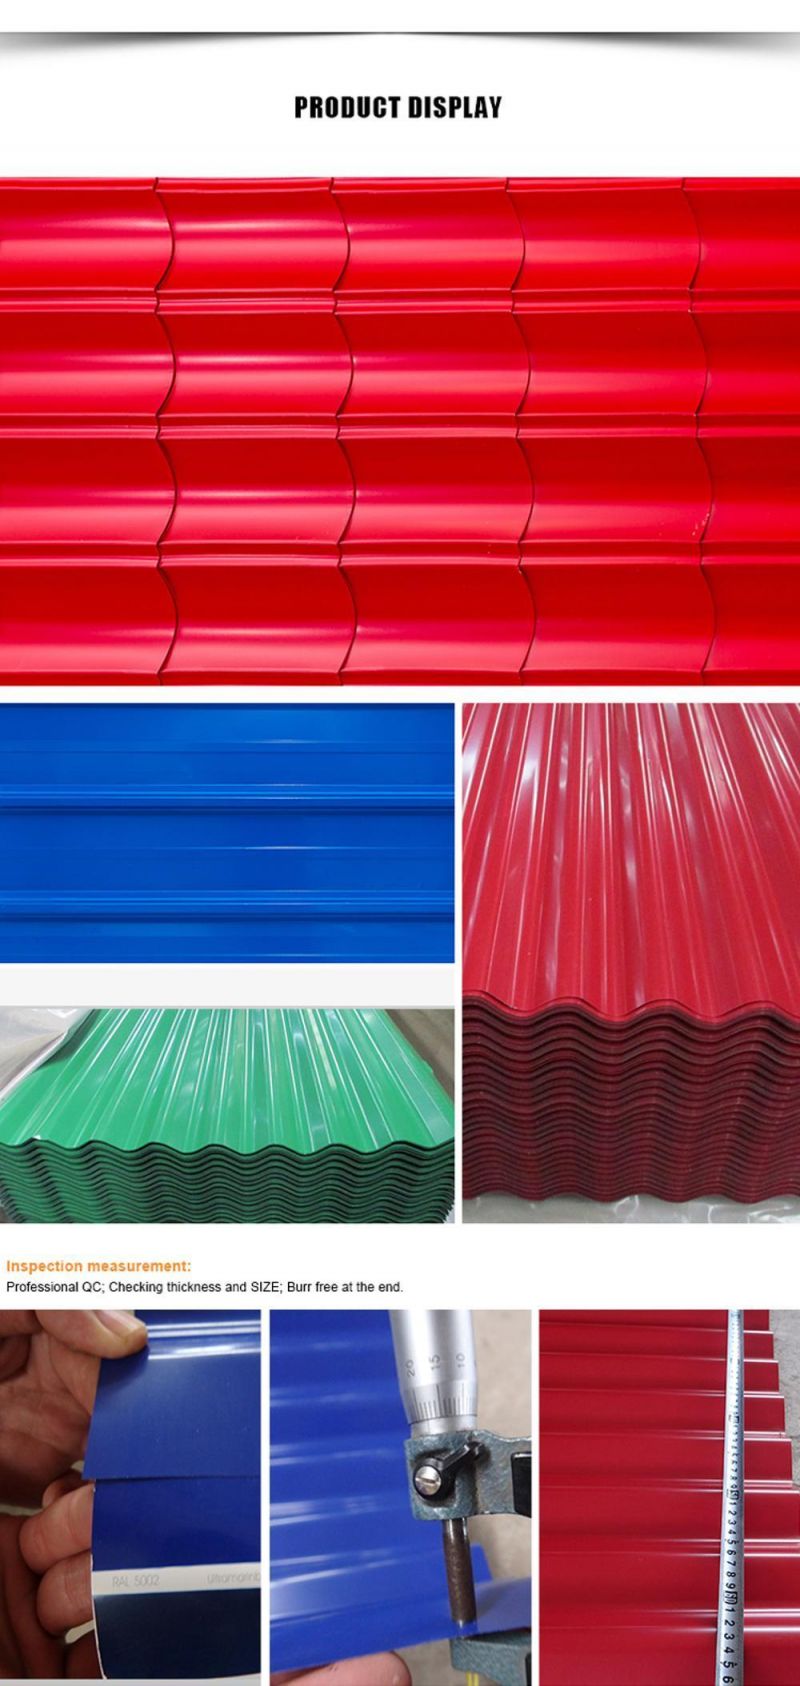 ASTM A792 Building Material Color Coated Galvalume Corrugated Metal Roofing Sheet